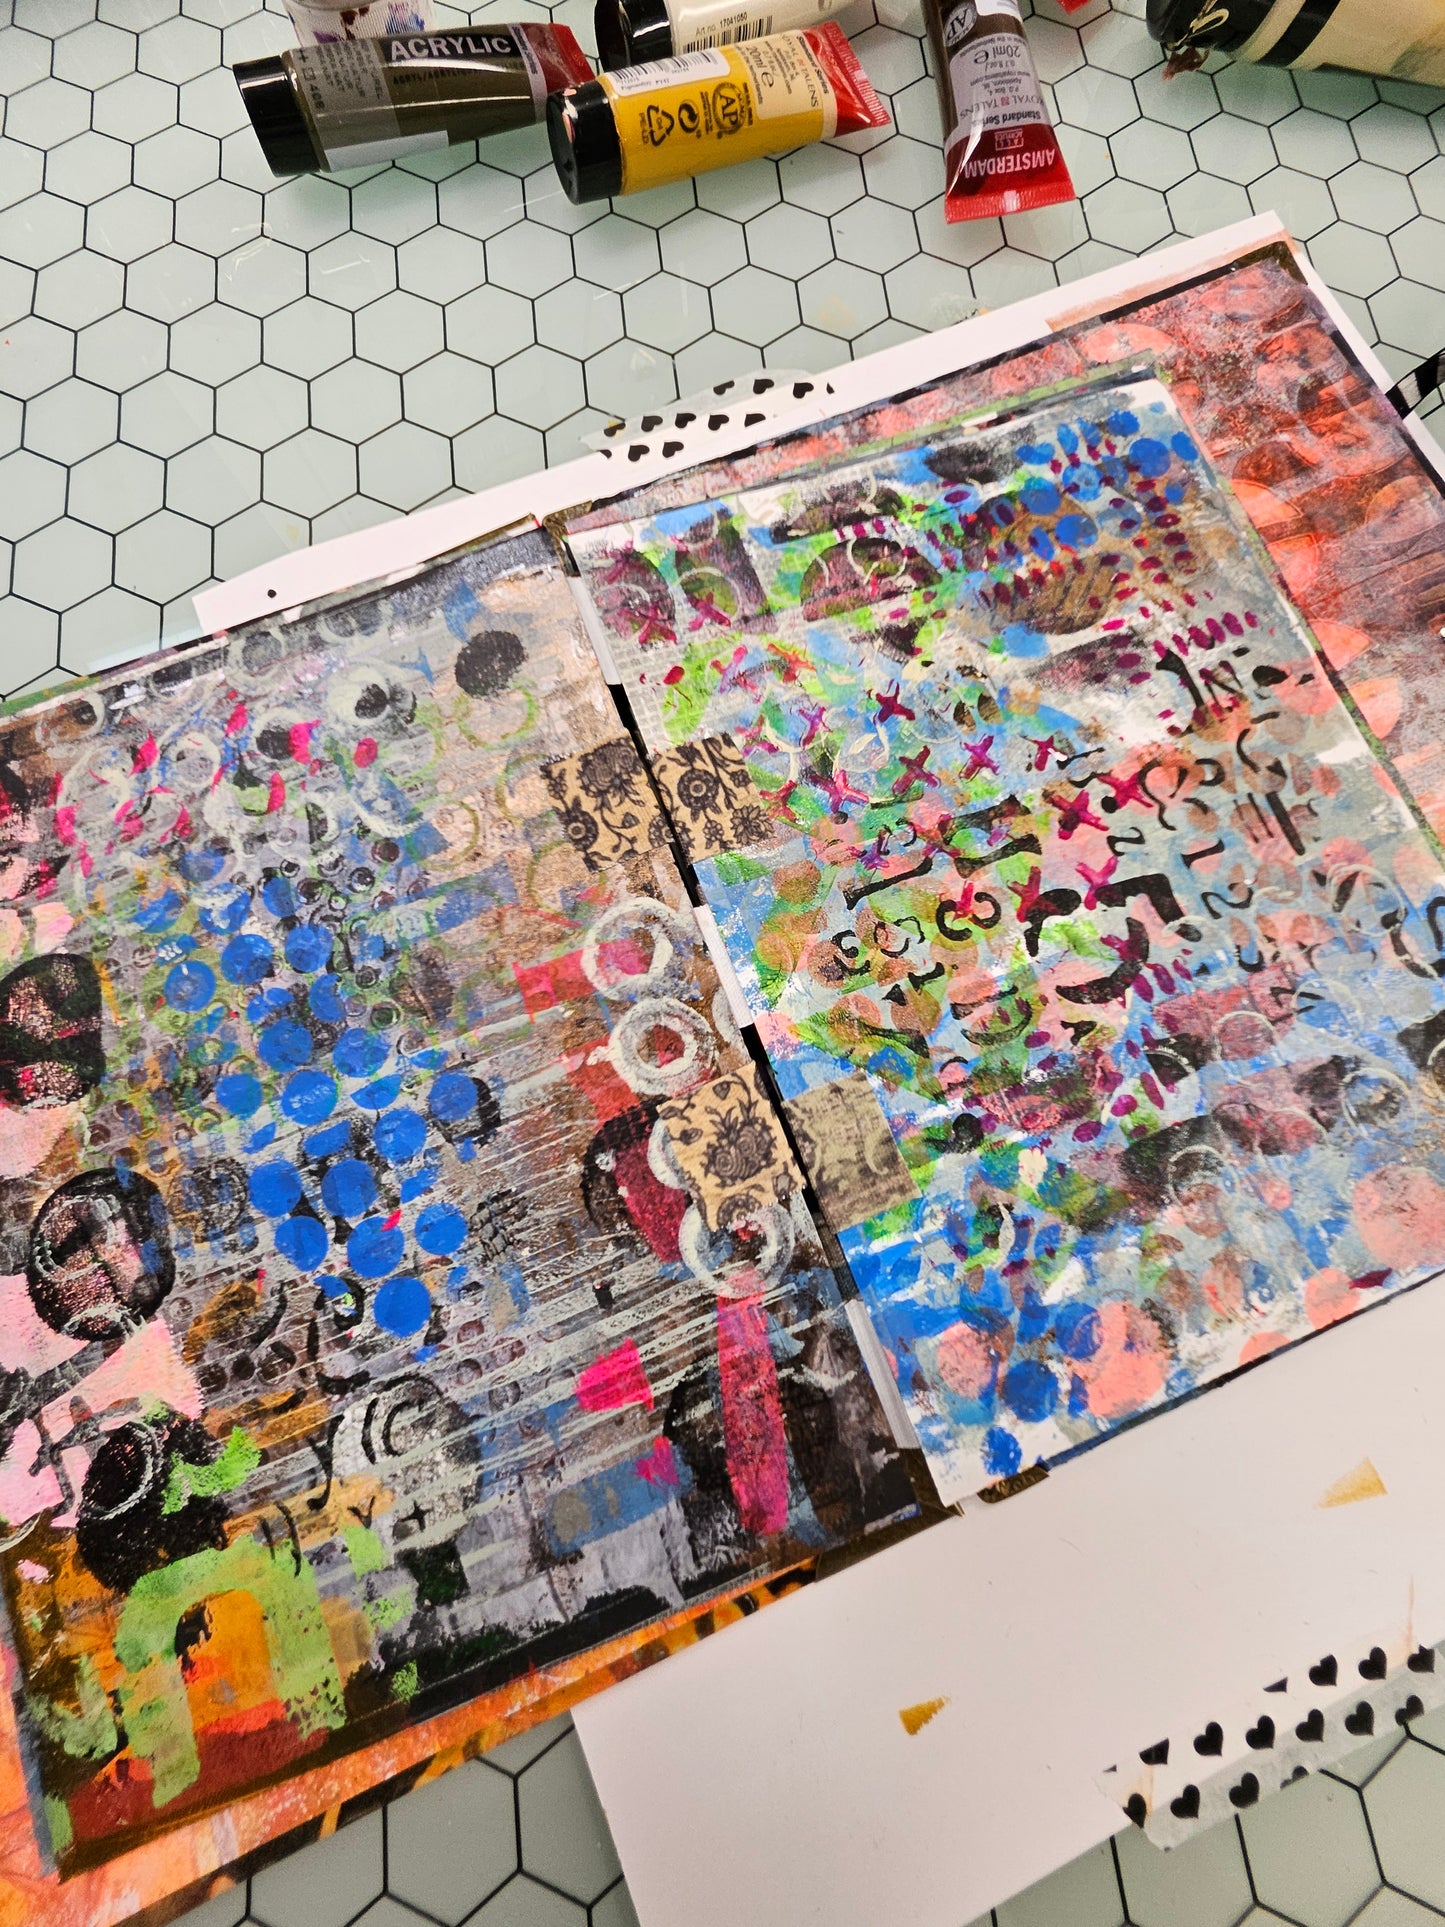 Gorgeous Grunge Journal: 8.75"x6.75" - Multi-Media Pages, Acrylic Paint, Tab Binding, Tie Closure, Fabric Cover